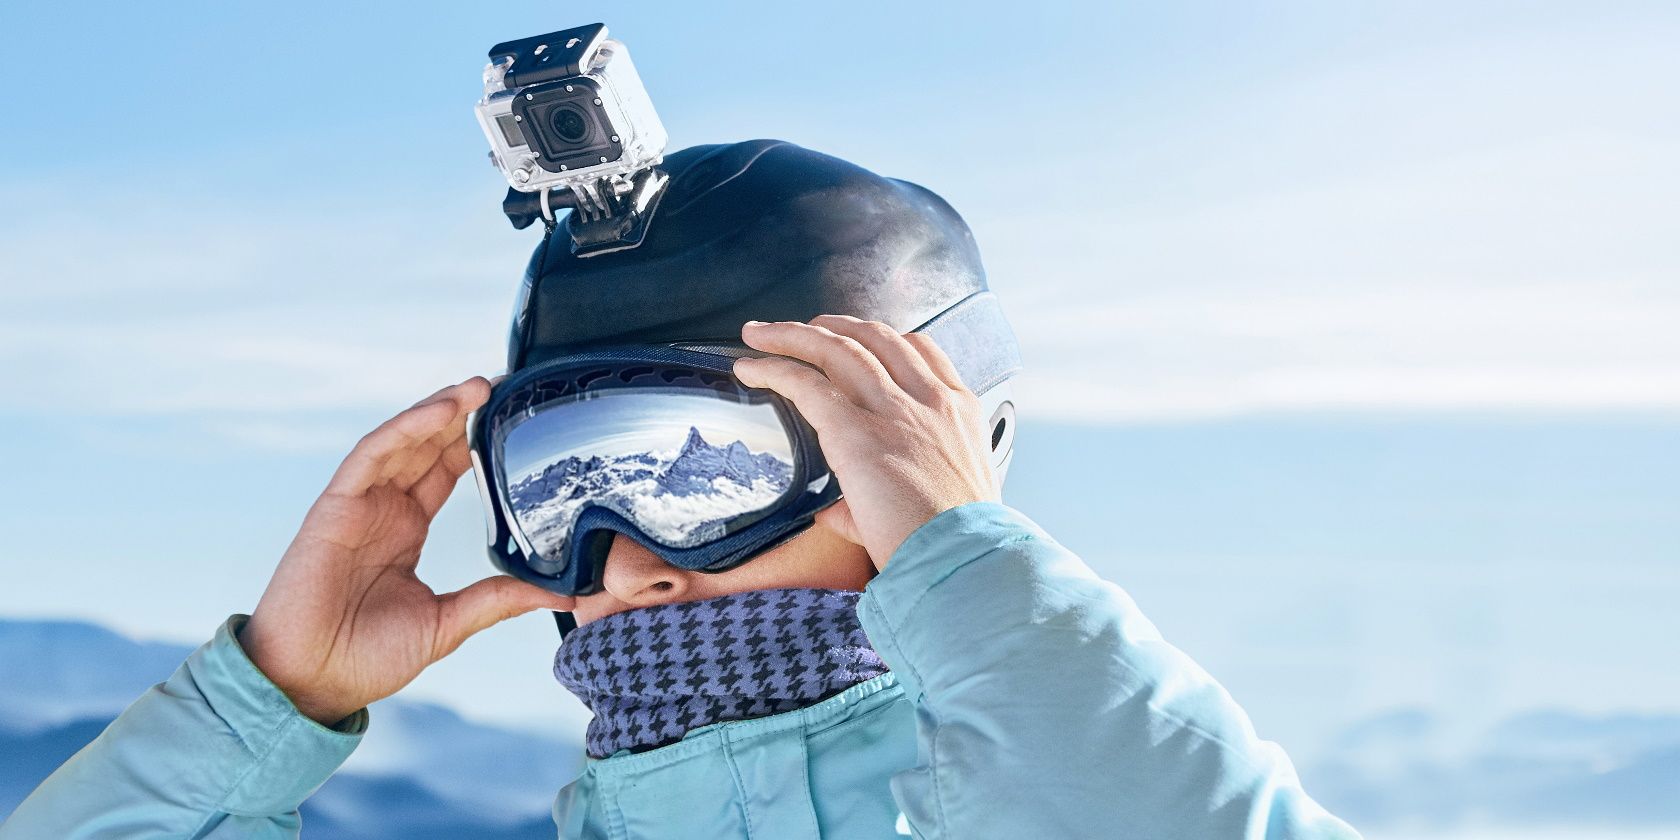 Skier with action camera on a helmet. Ski goggles with the reflection of snowed mountains